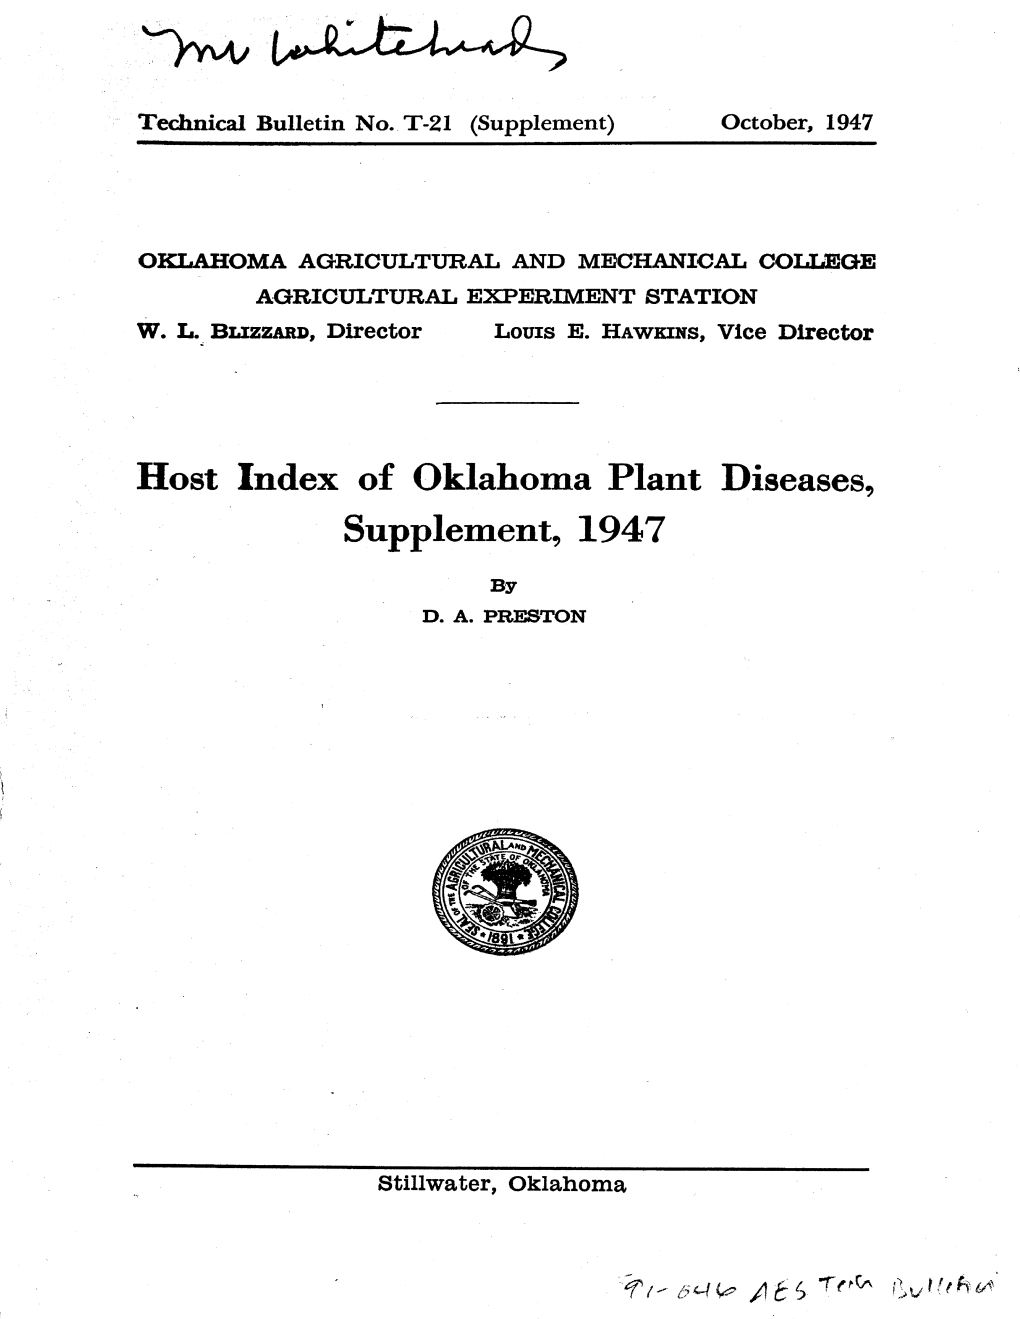 Host Index of Oklahoma Plant Diseases, Supplement, 1947